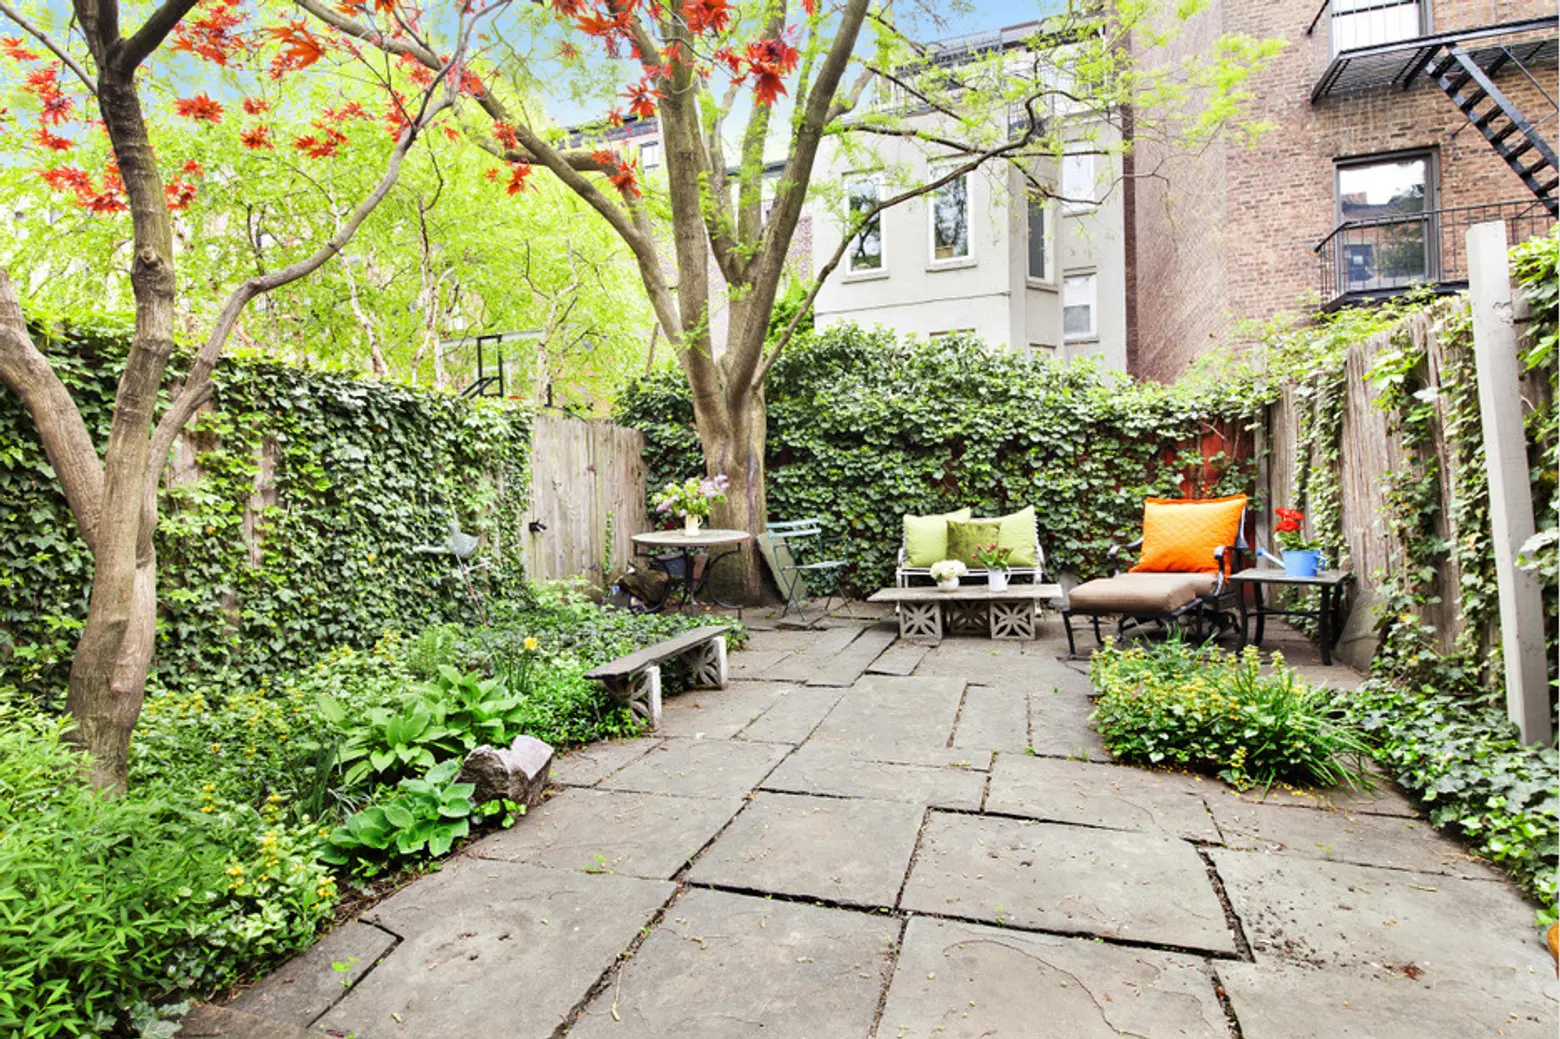 426 West 22nd Street, James Phelan Row, multiple outdoor spaces, Guiding Light